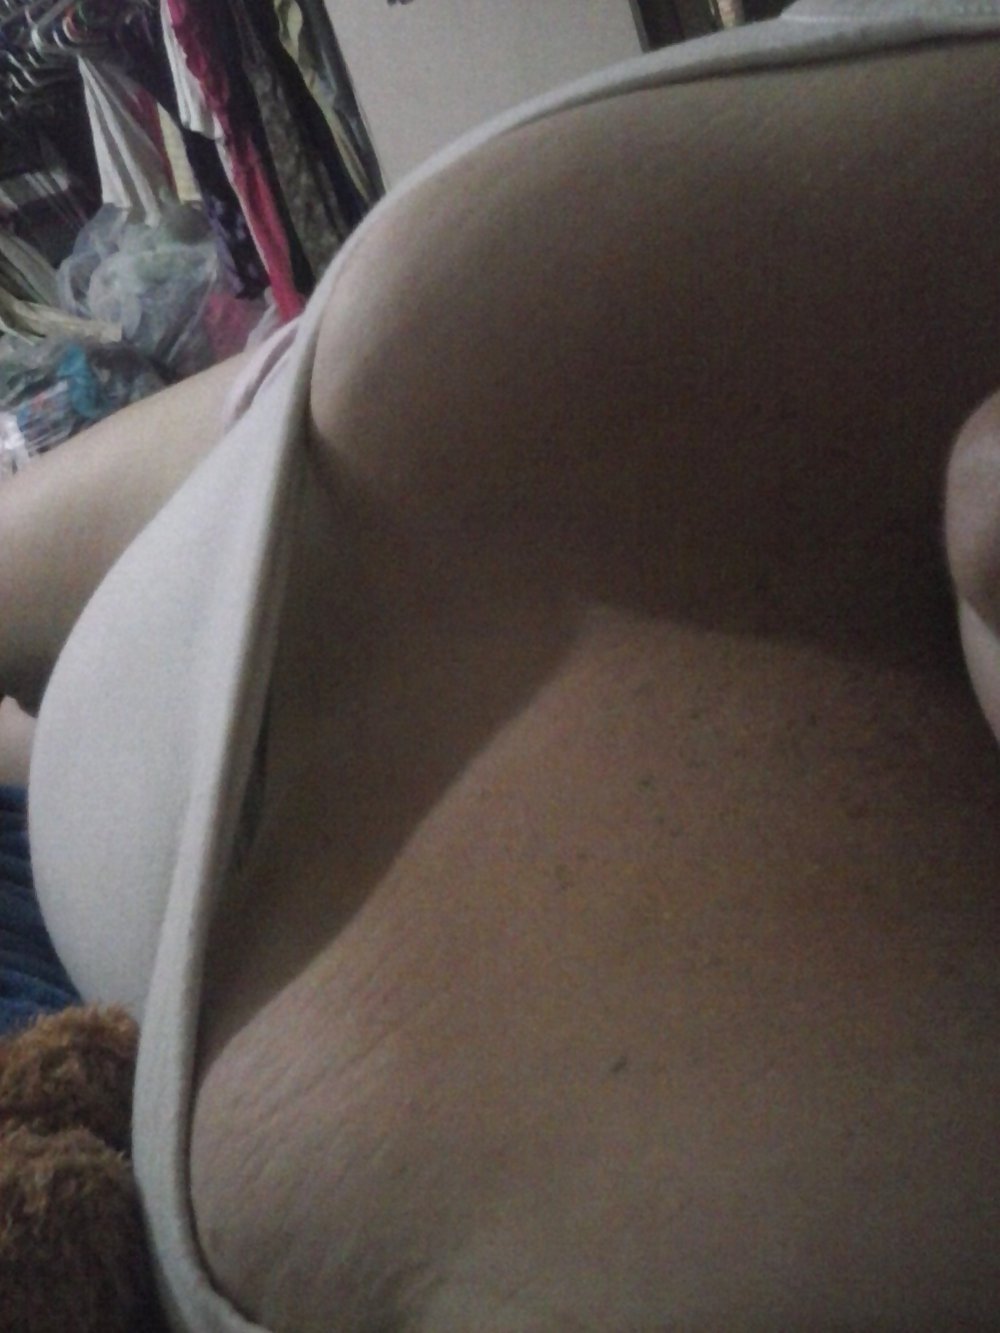 Porn Pics Pictures i texted to Hubby while his at work